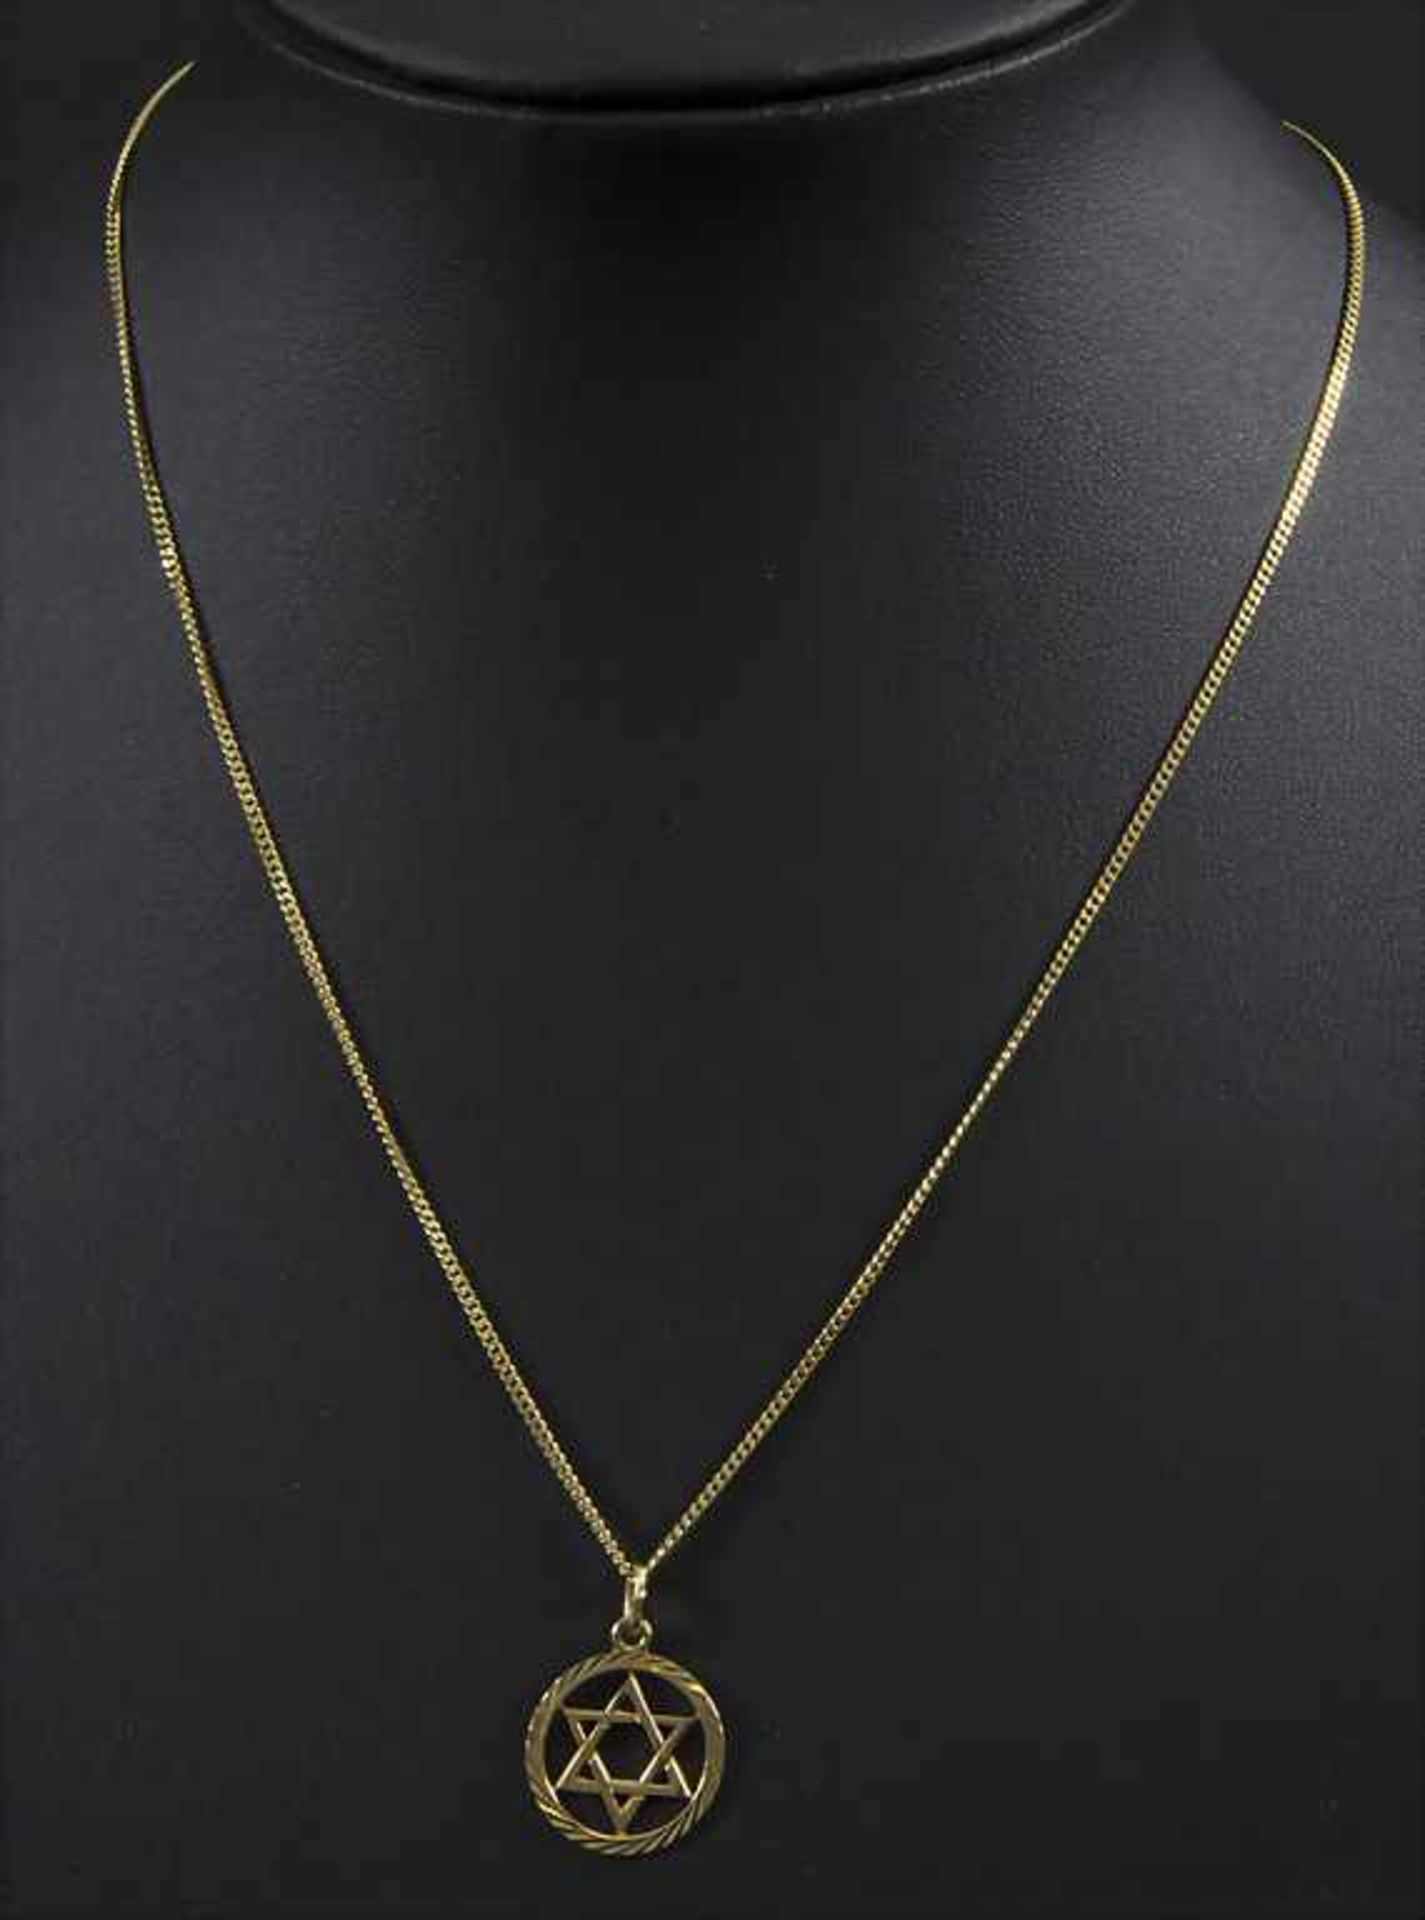 Kette mit Anhänger in Gold / A gold necklace and pendant - Image 2 of 3